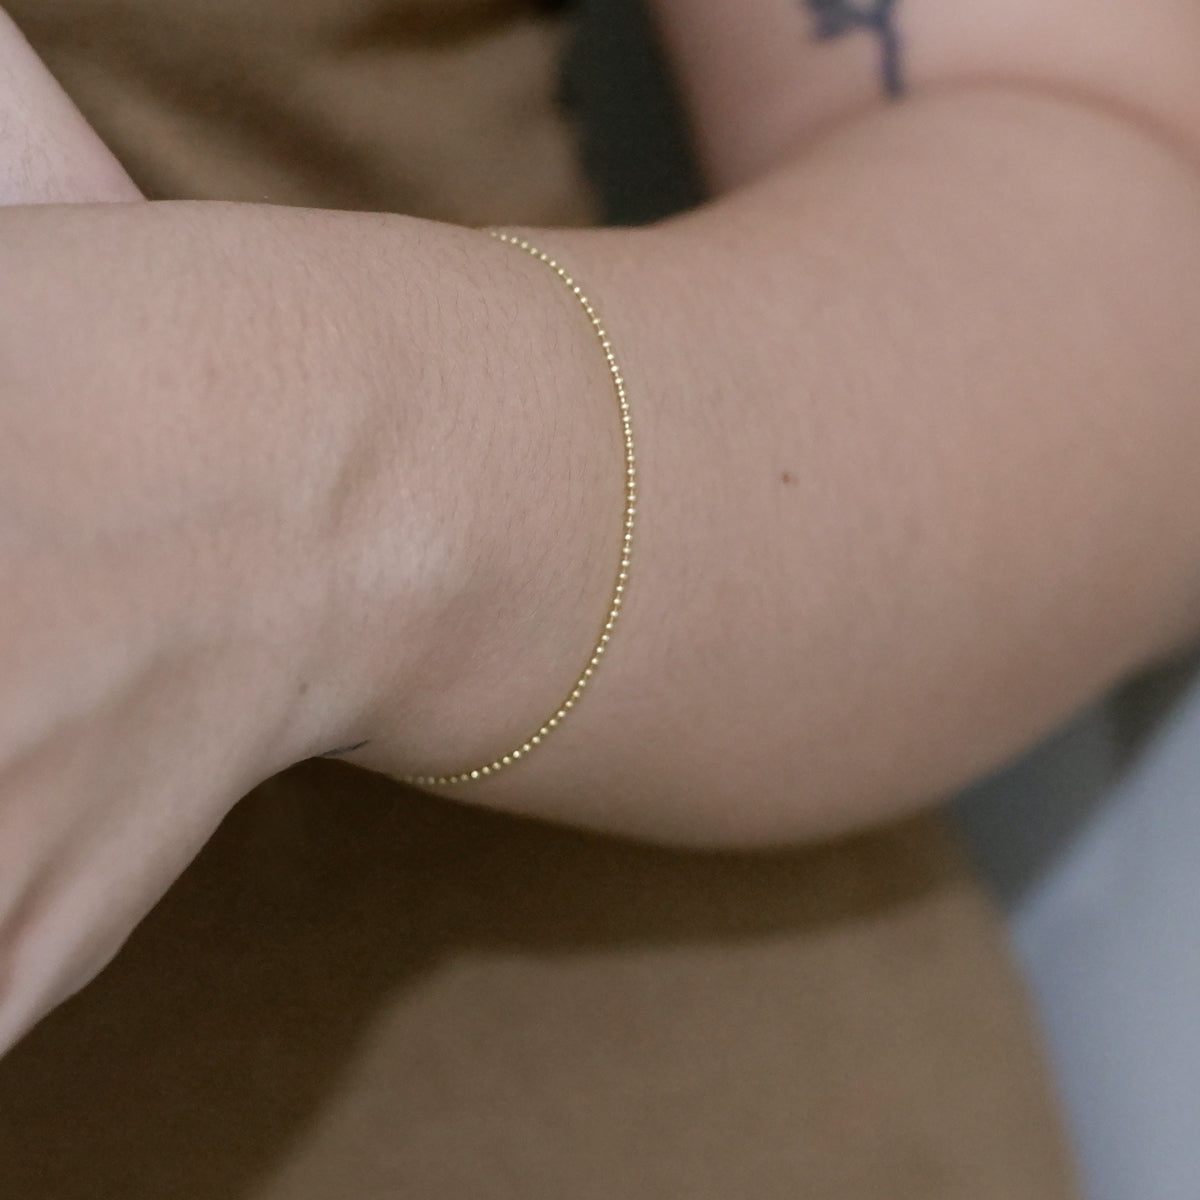 The Ultra Minimalist Beaded Bracelet in Solid Gold